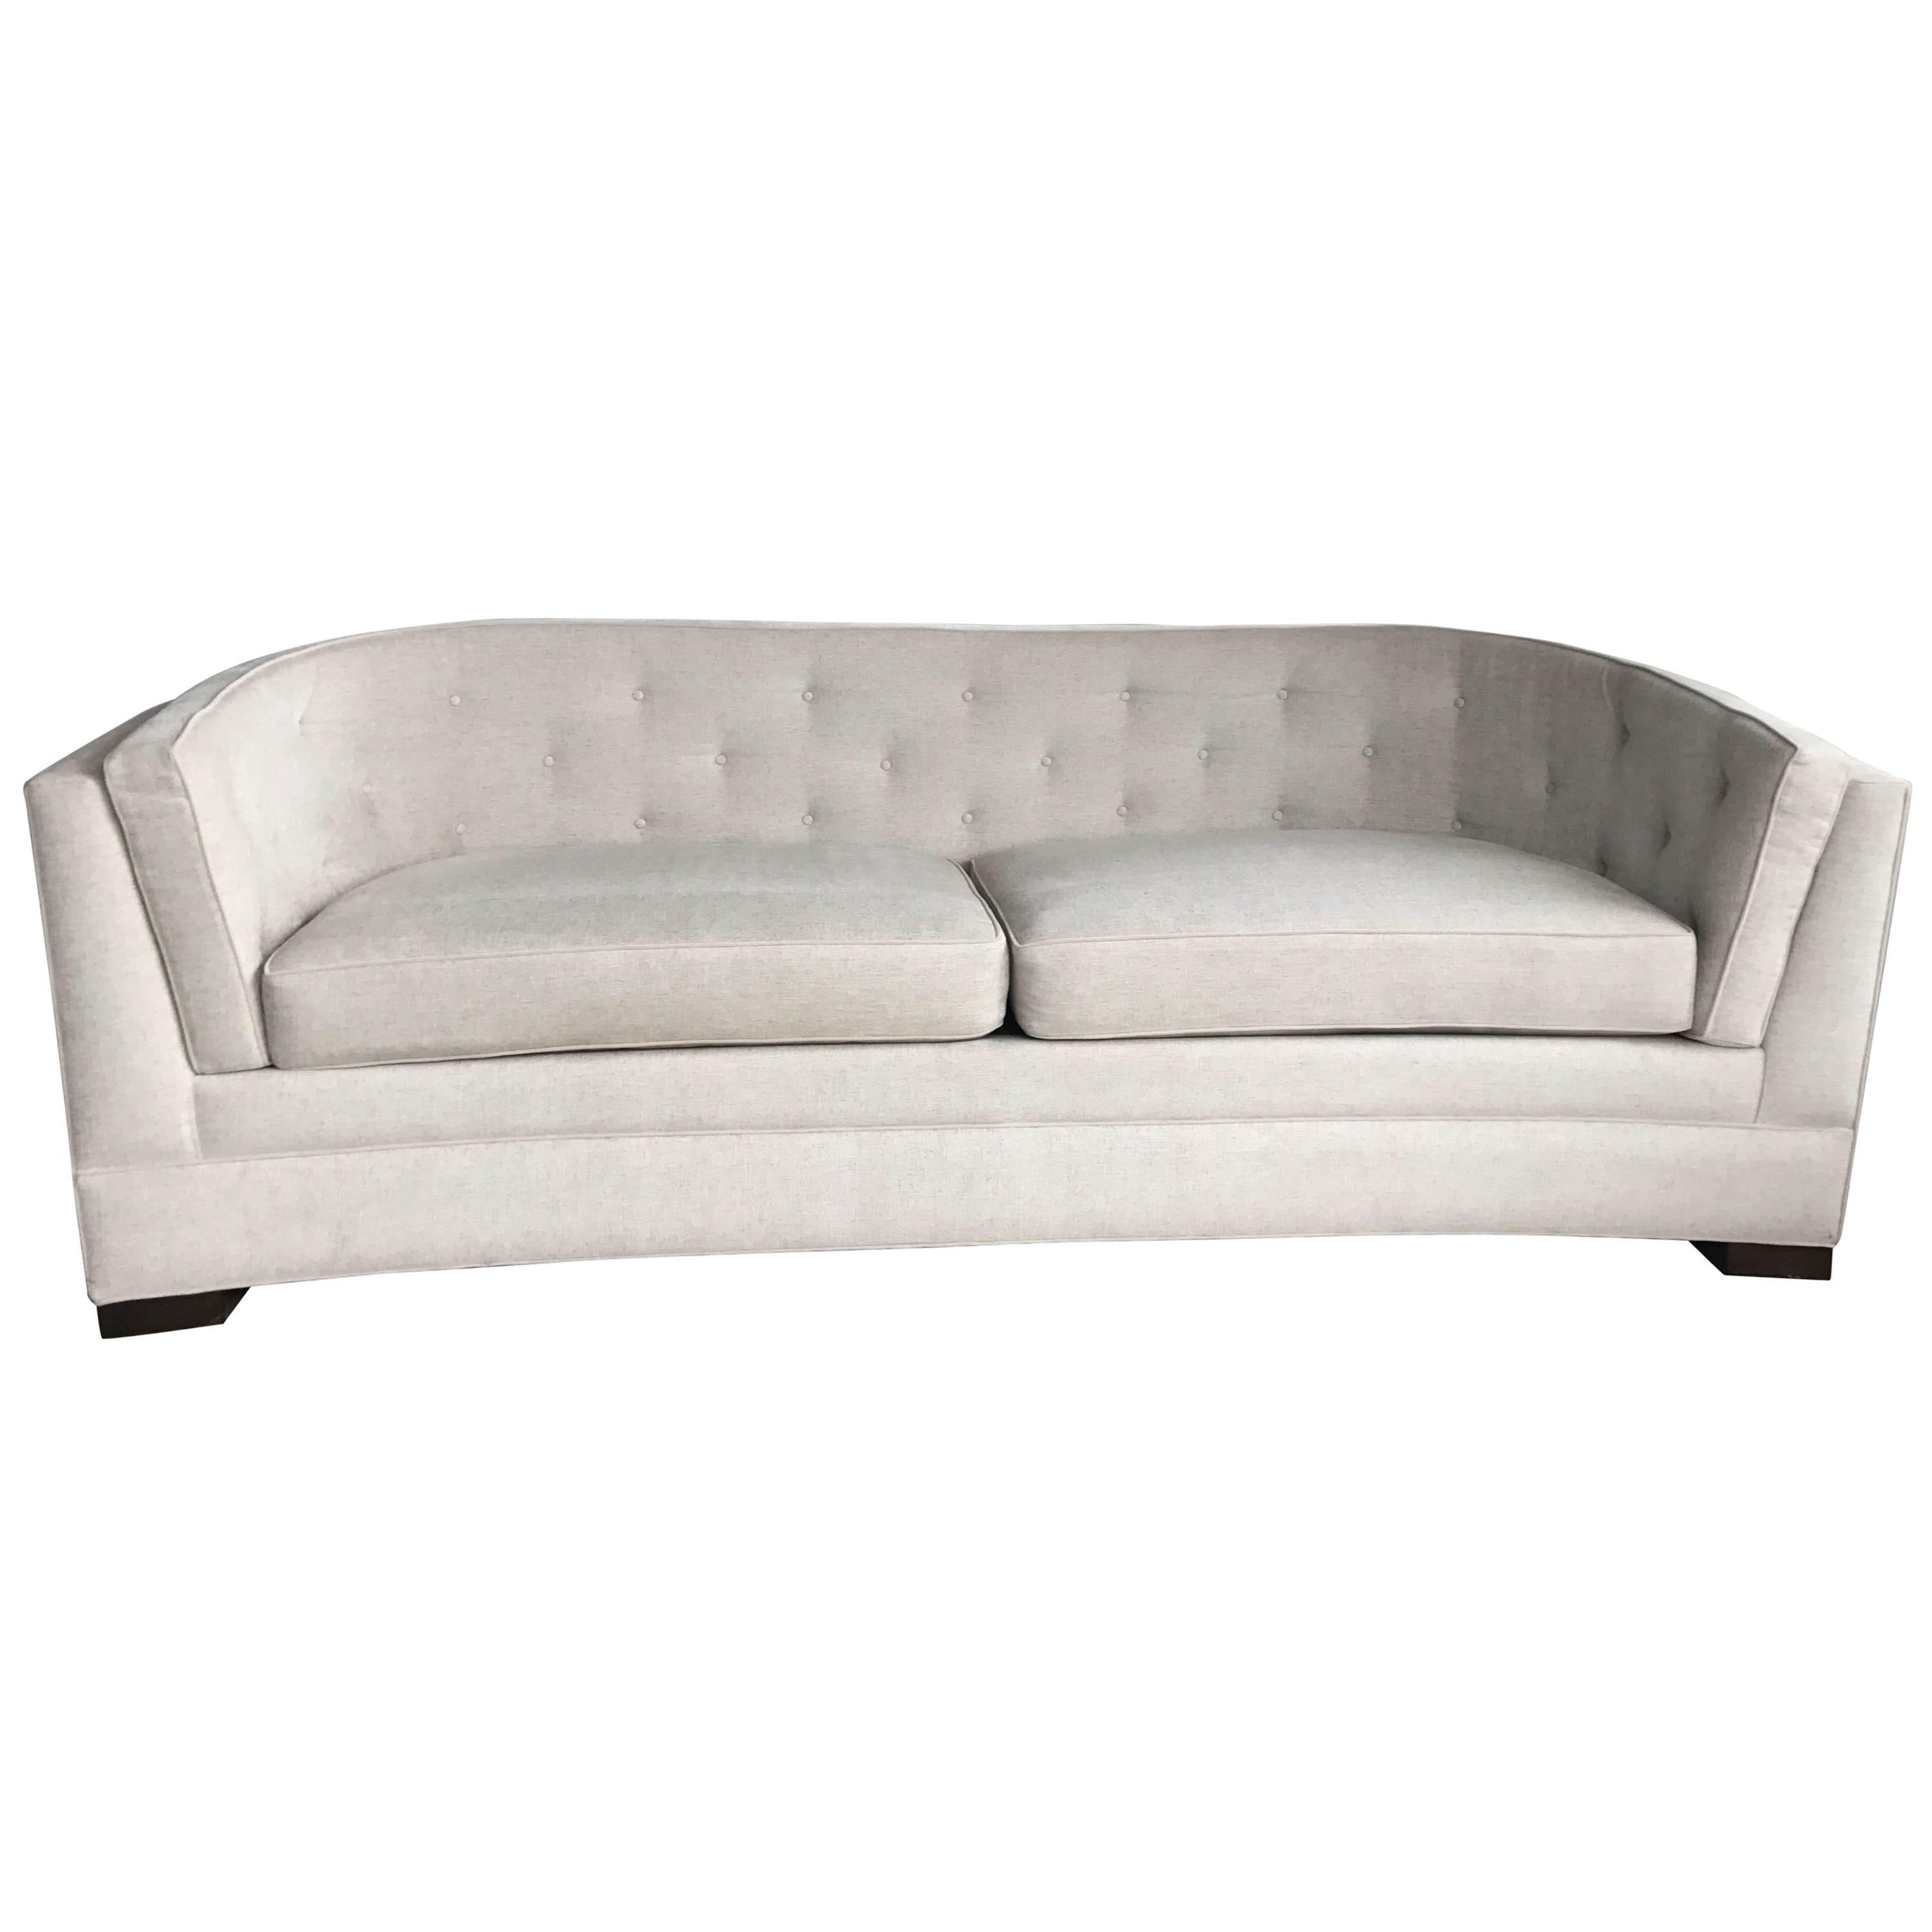 Bespoke Curved Low Profile Sofa with Tufted Back For Sale